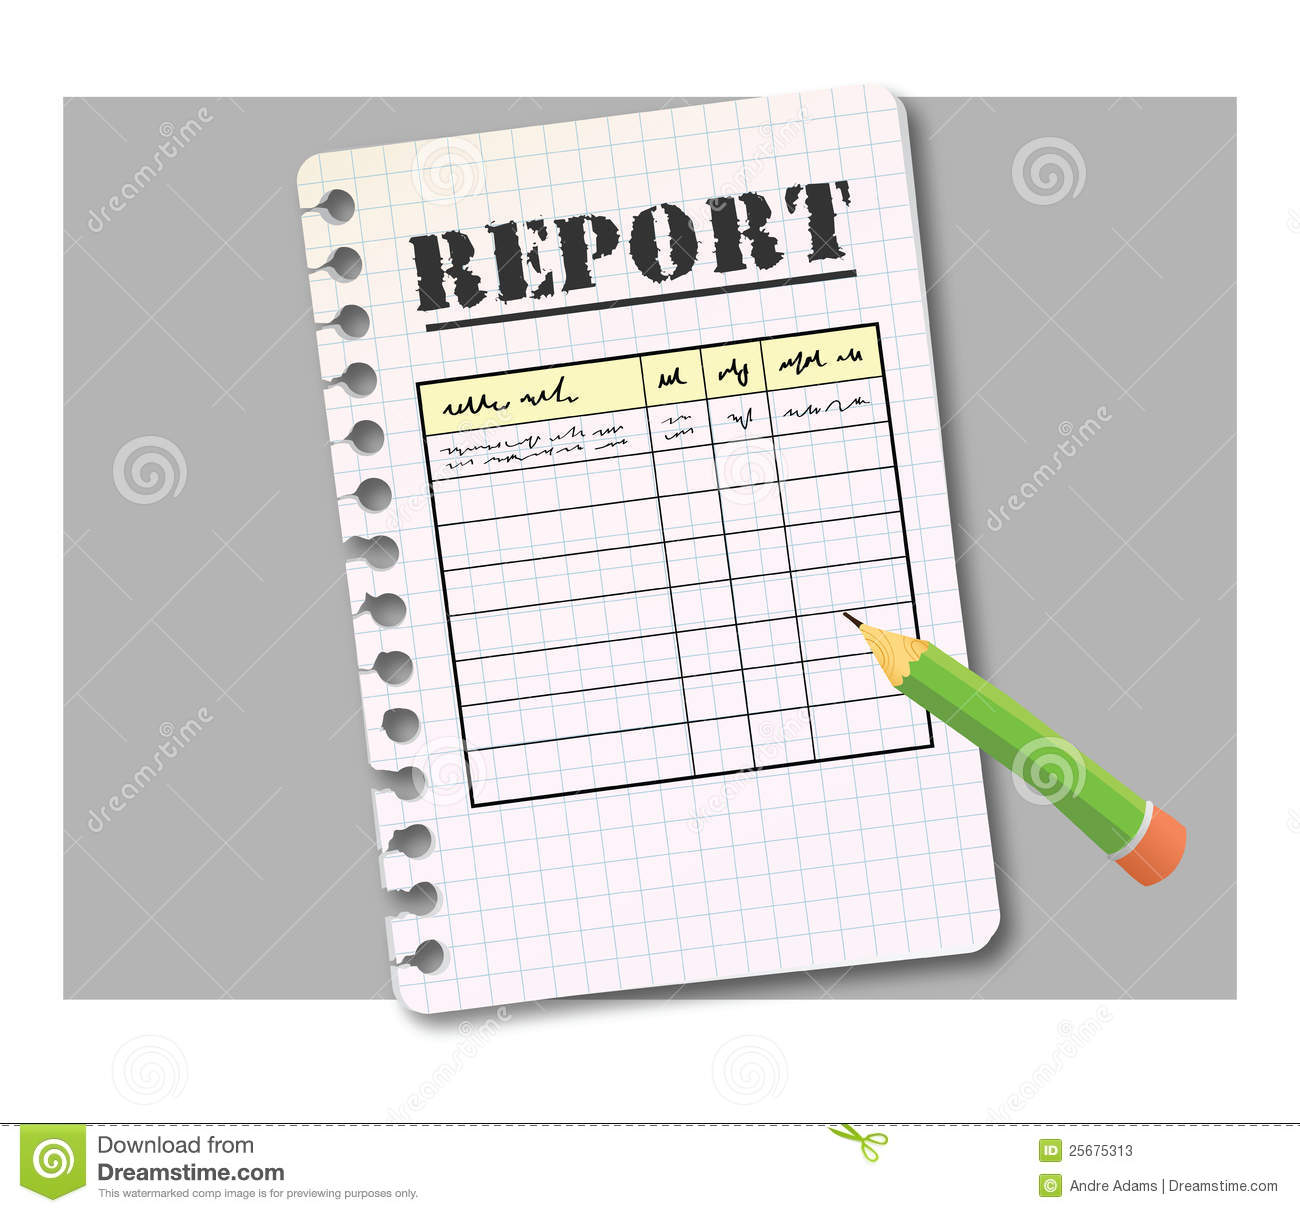 Report Form Stock Photos   Image  25675313